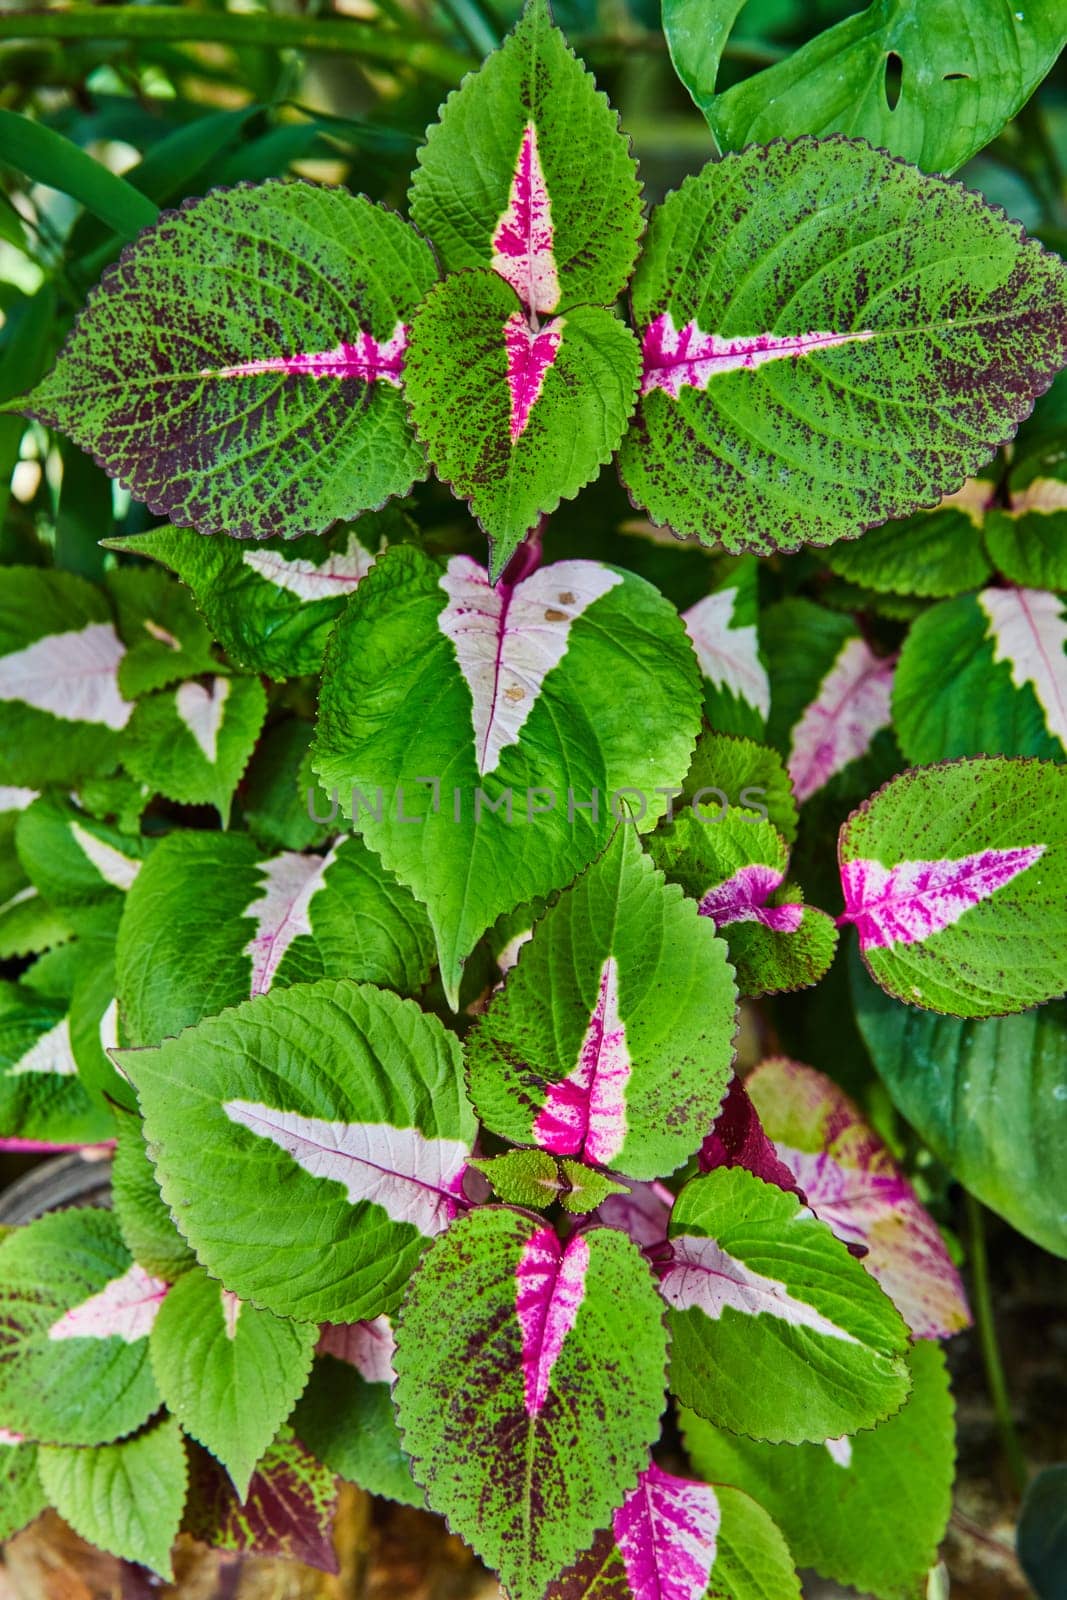 Vibrant ornamental leaves with intricate pink veins in a lush Muncie conservatory setting, Indiana 2023